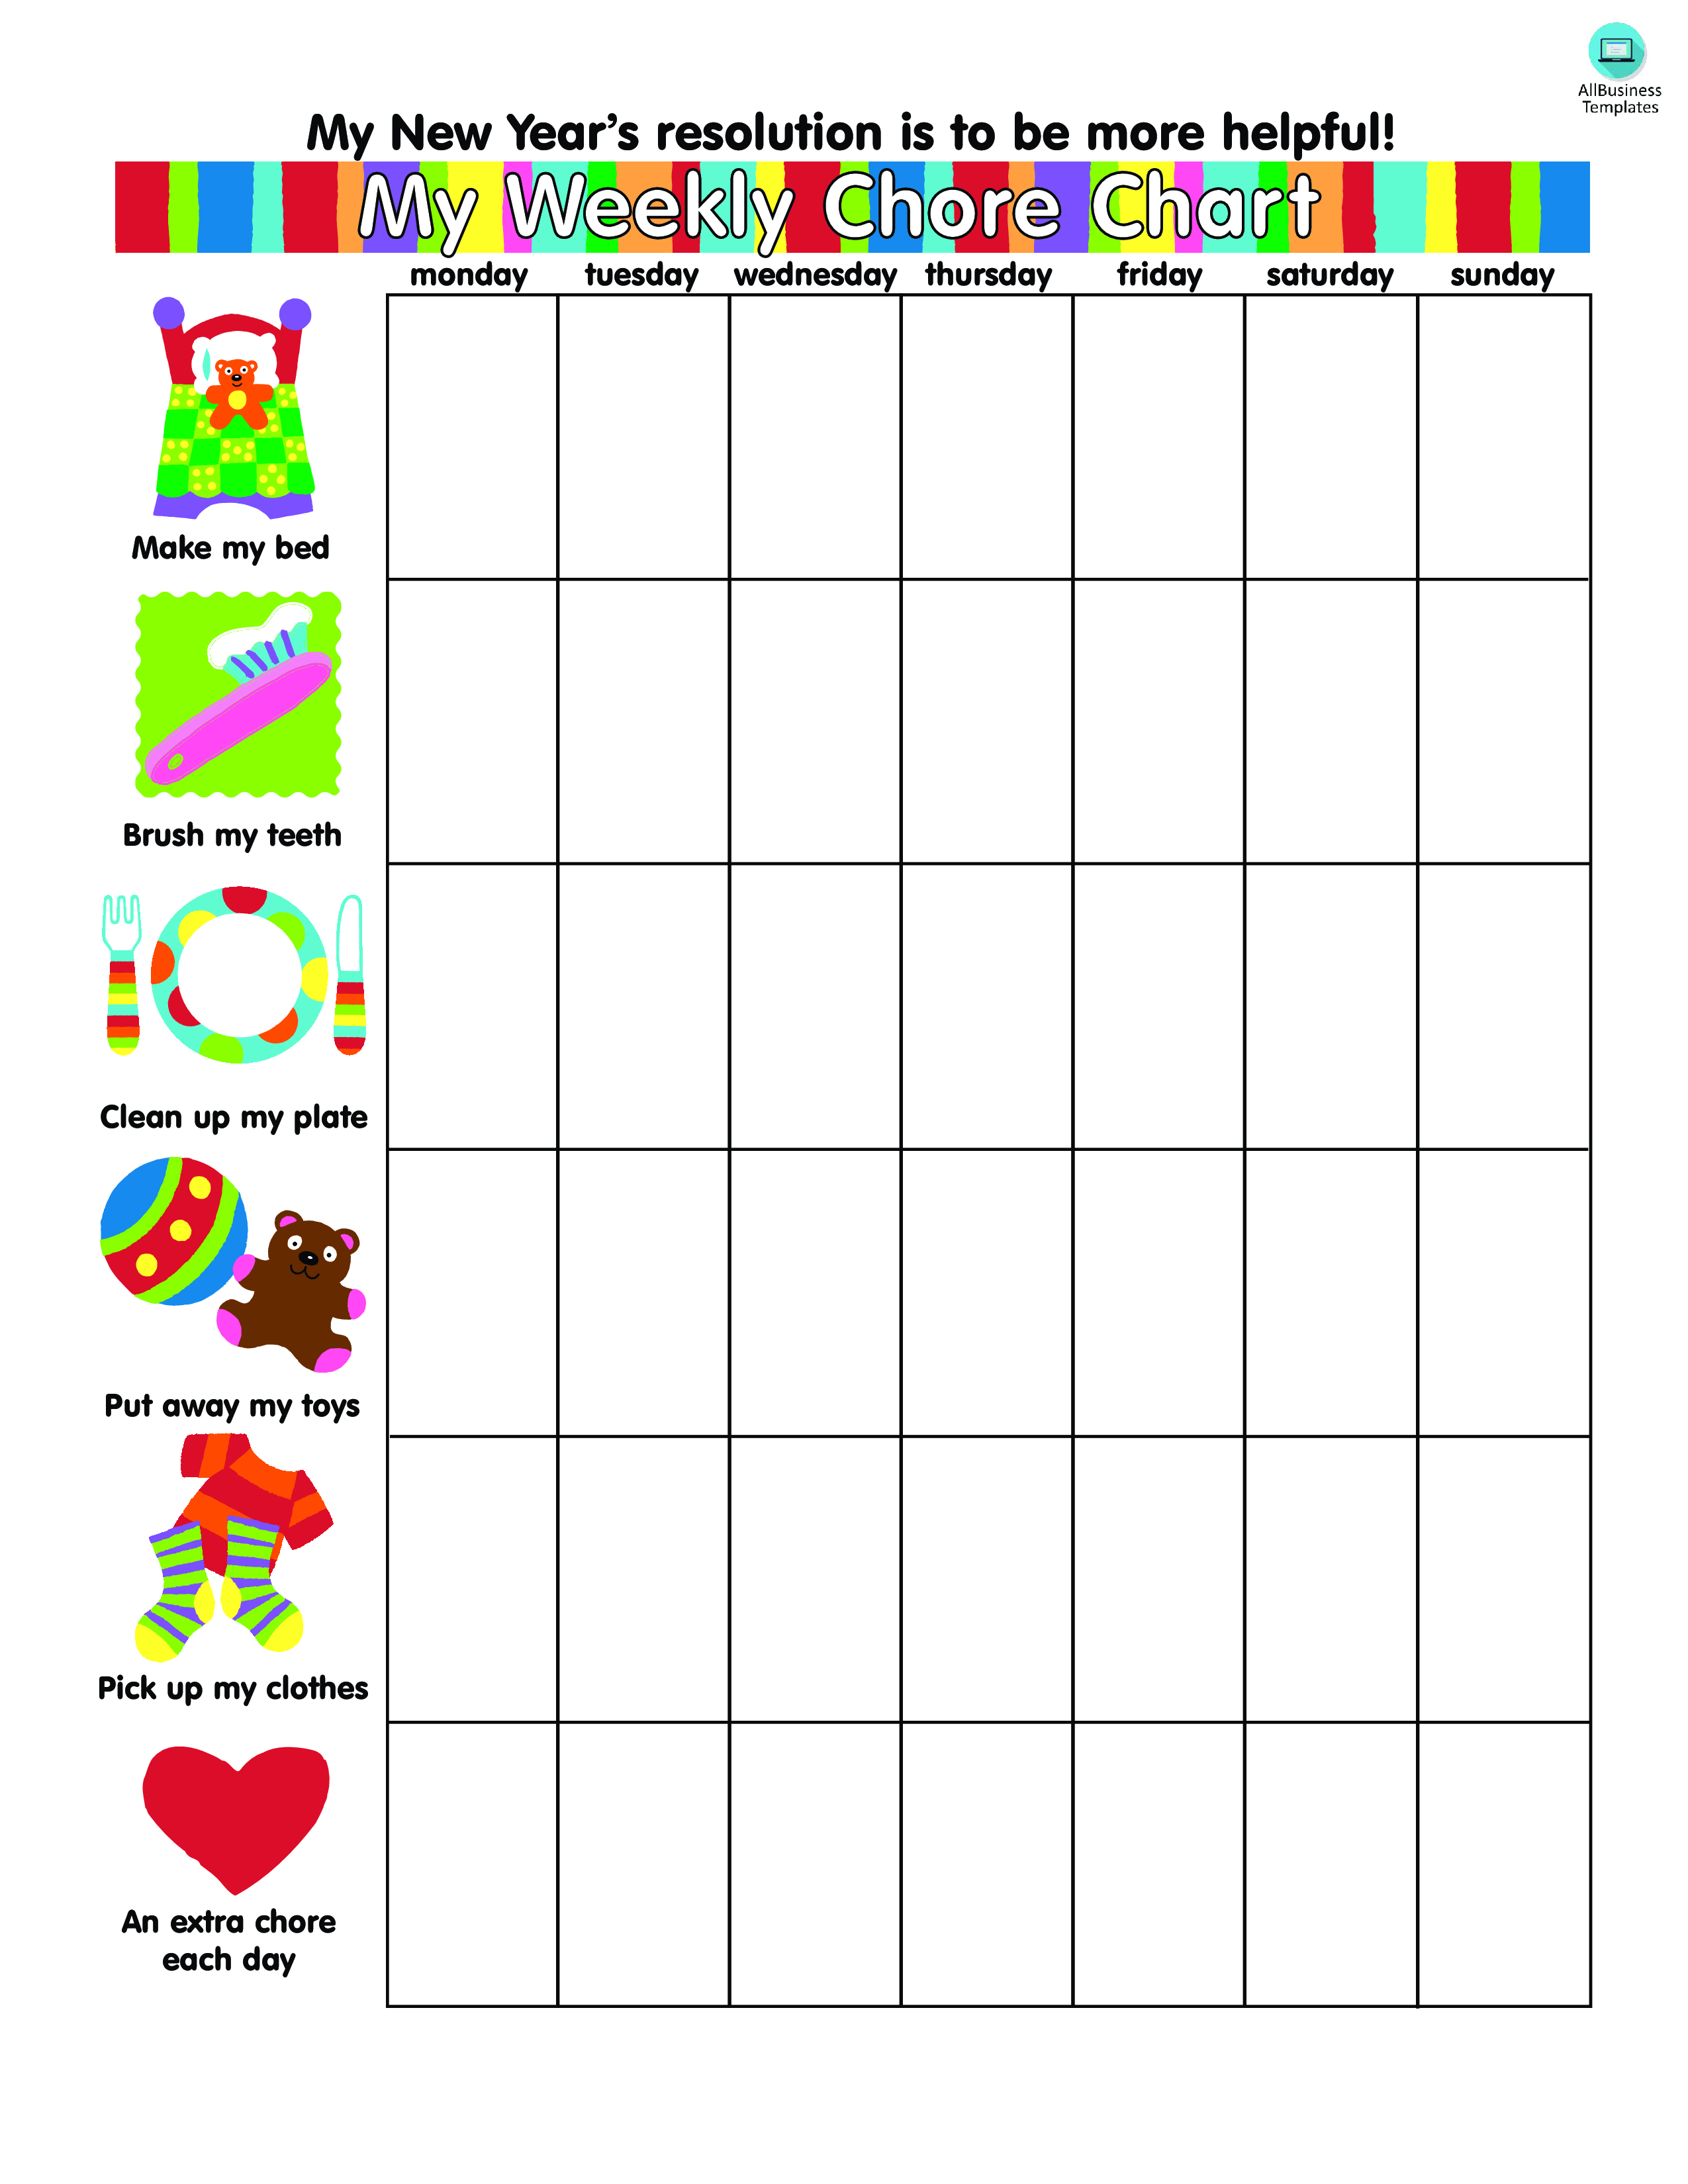 chore chart examples